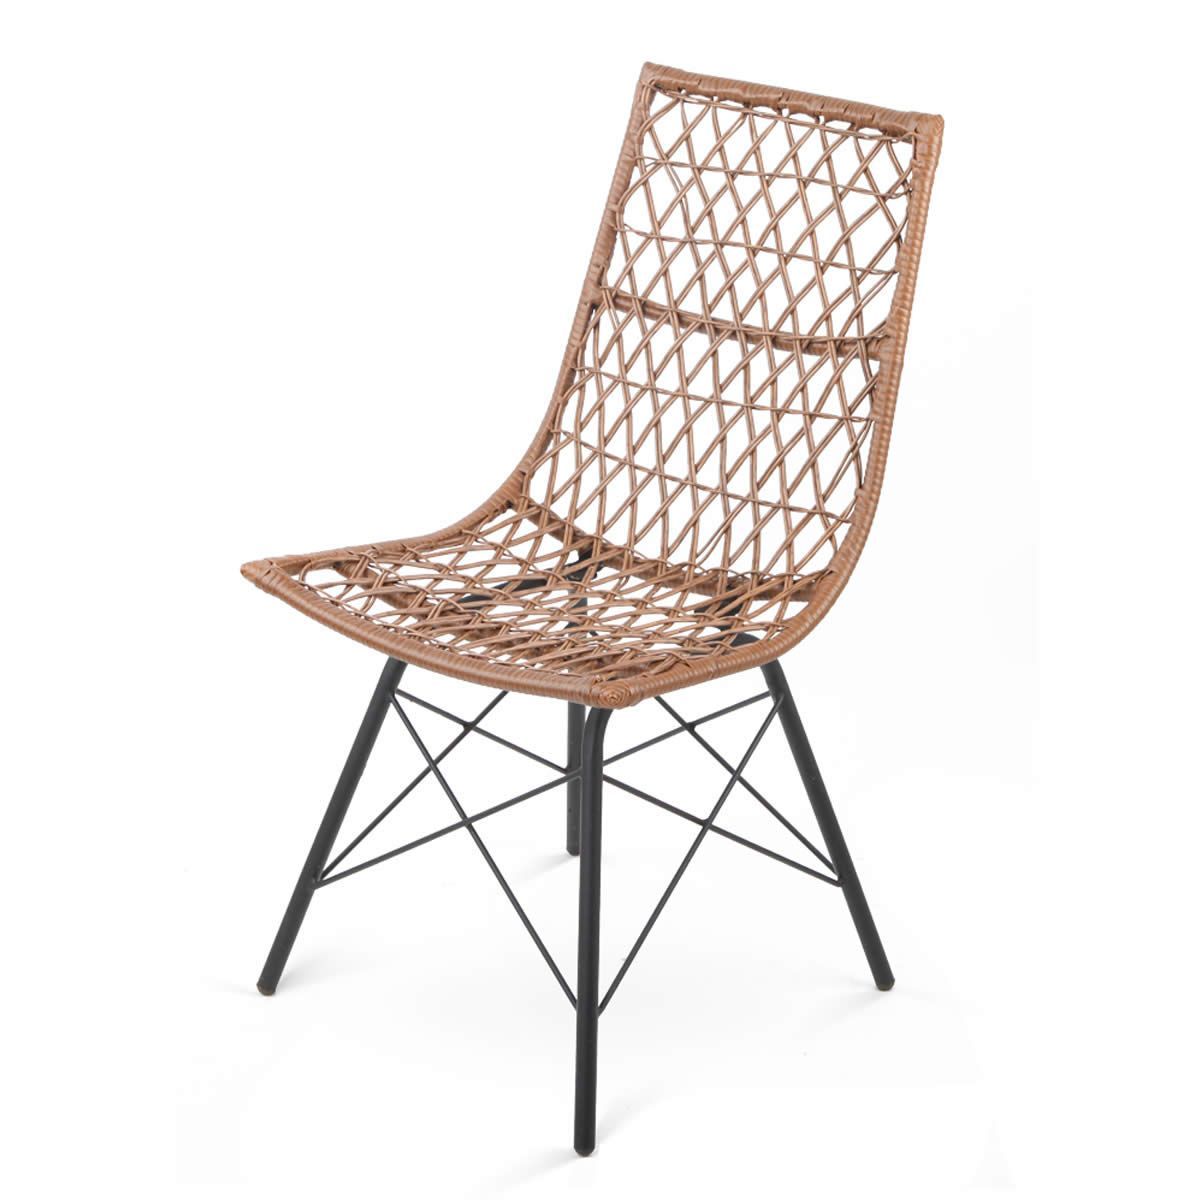 Set of 4 Outdoor Rattan Dining Chair | Crazy Sales